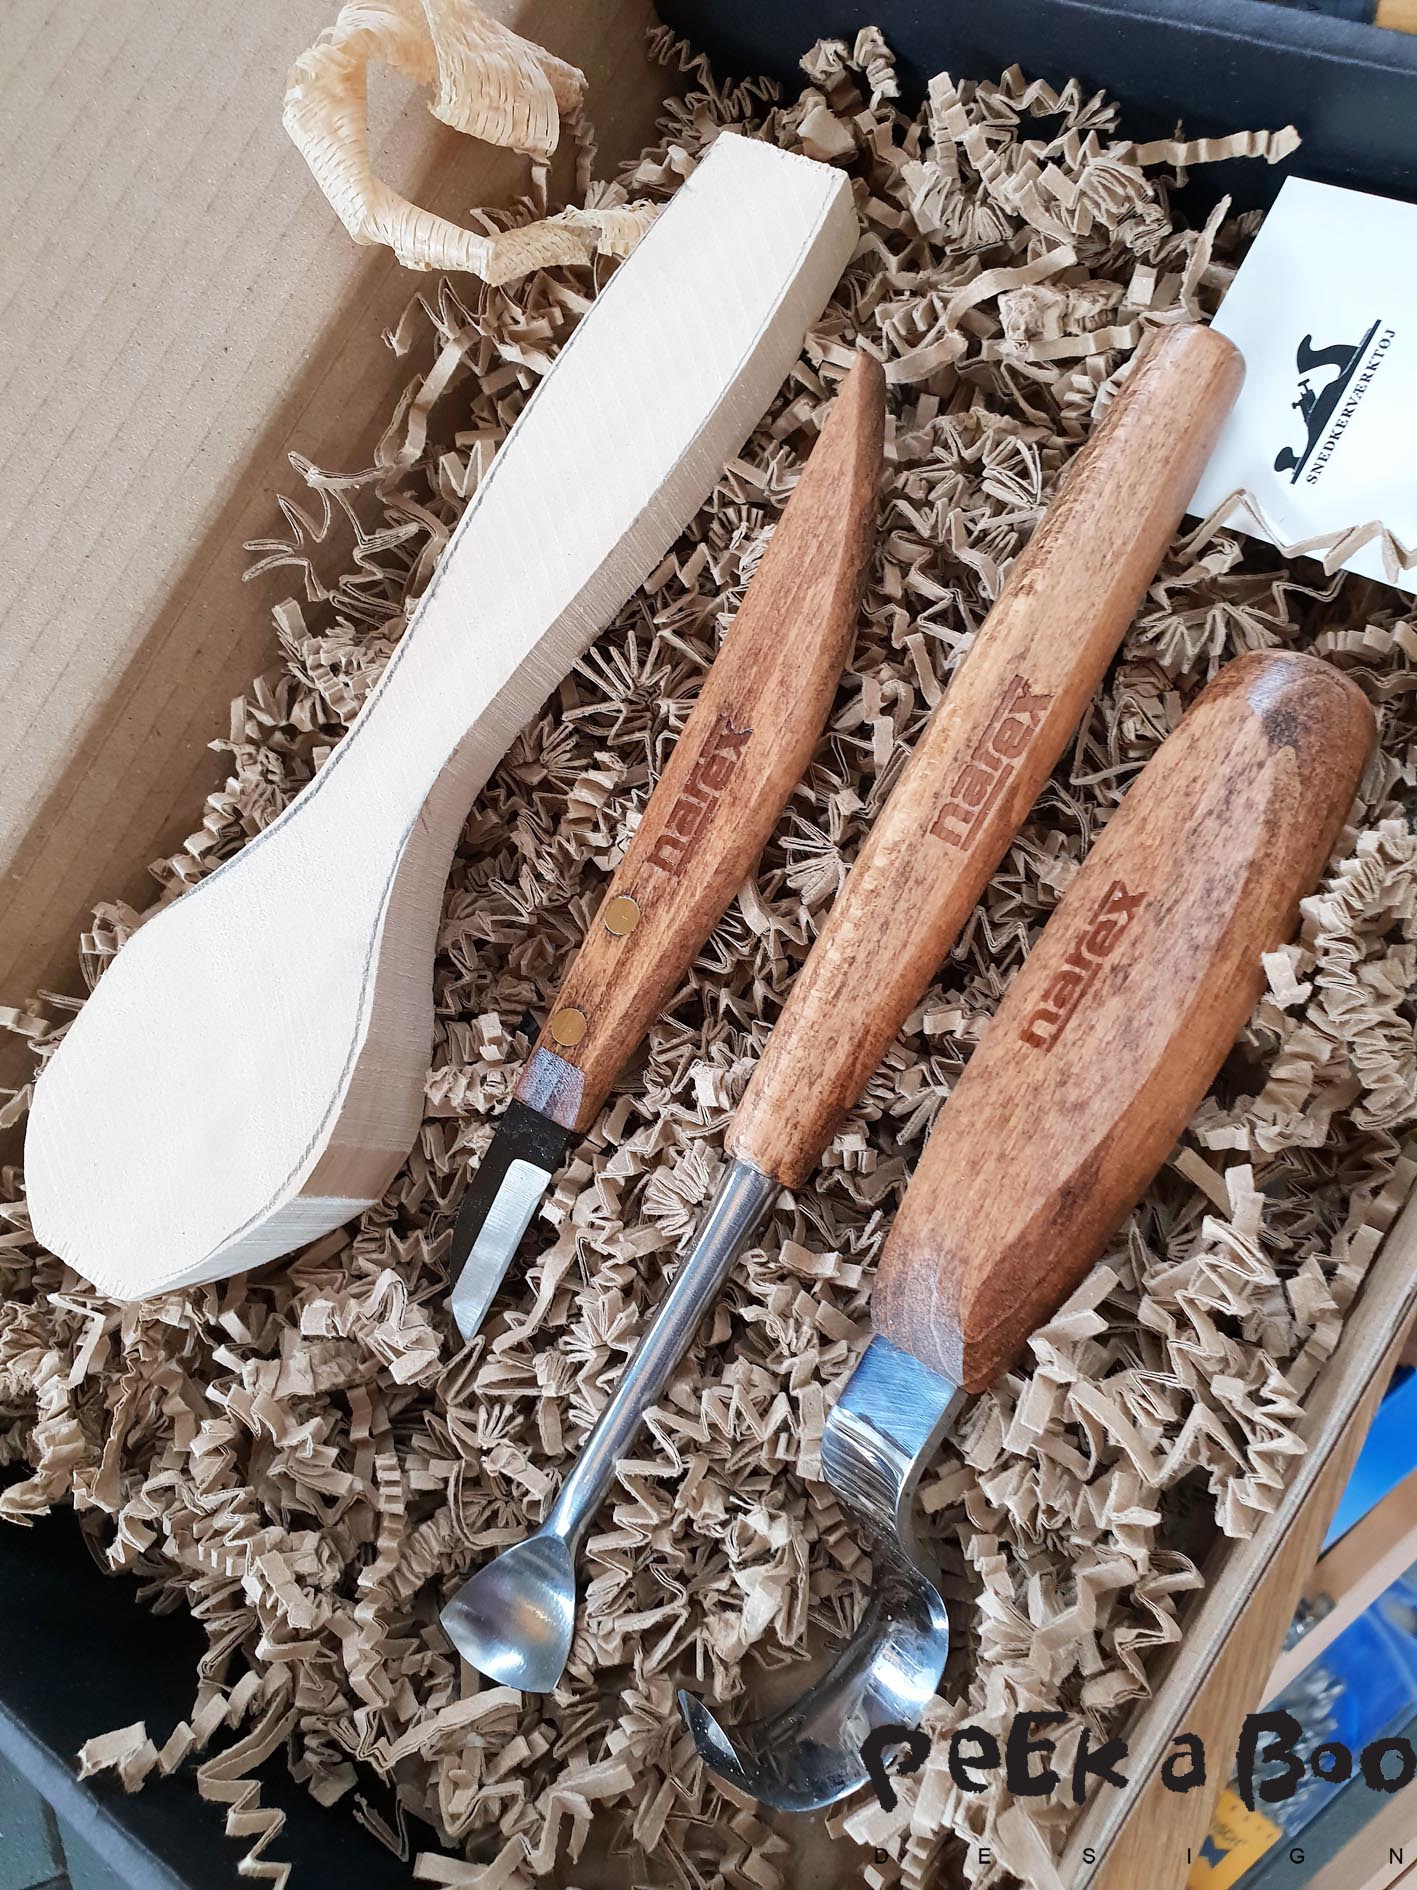 Henrik Knudsen sells tools for carving in wood. This DIY set is for making a spoon and the price is 599 kr.